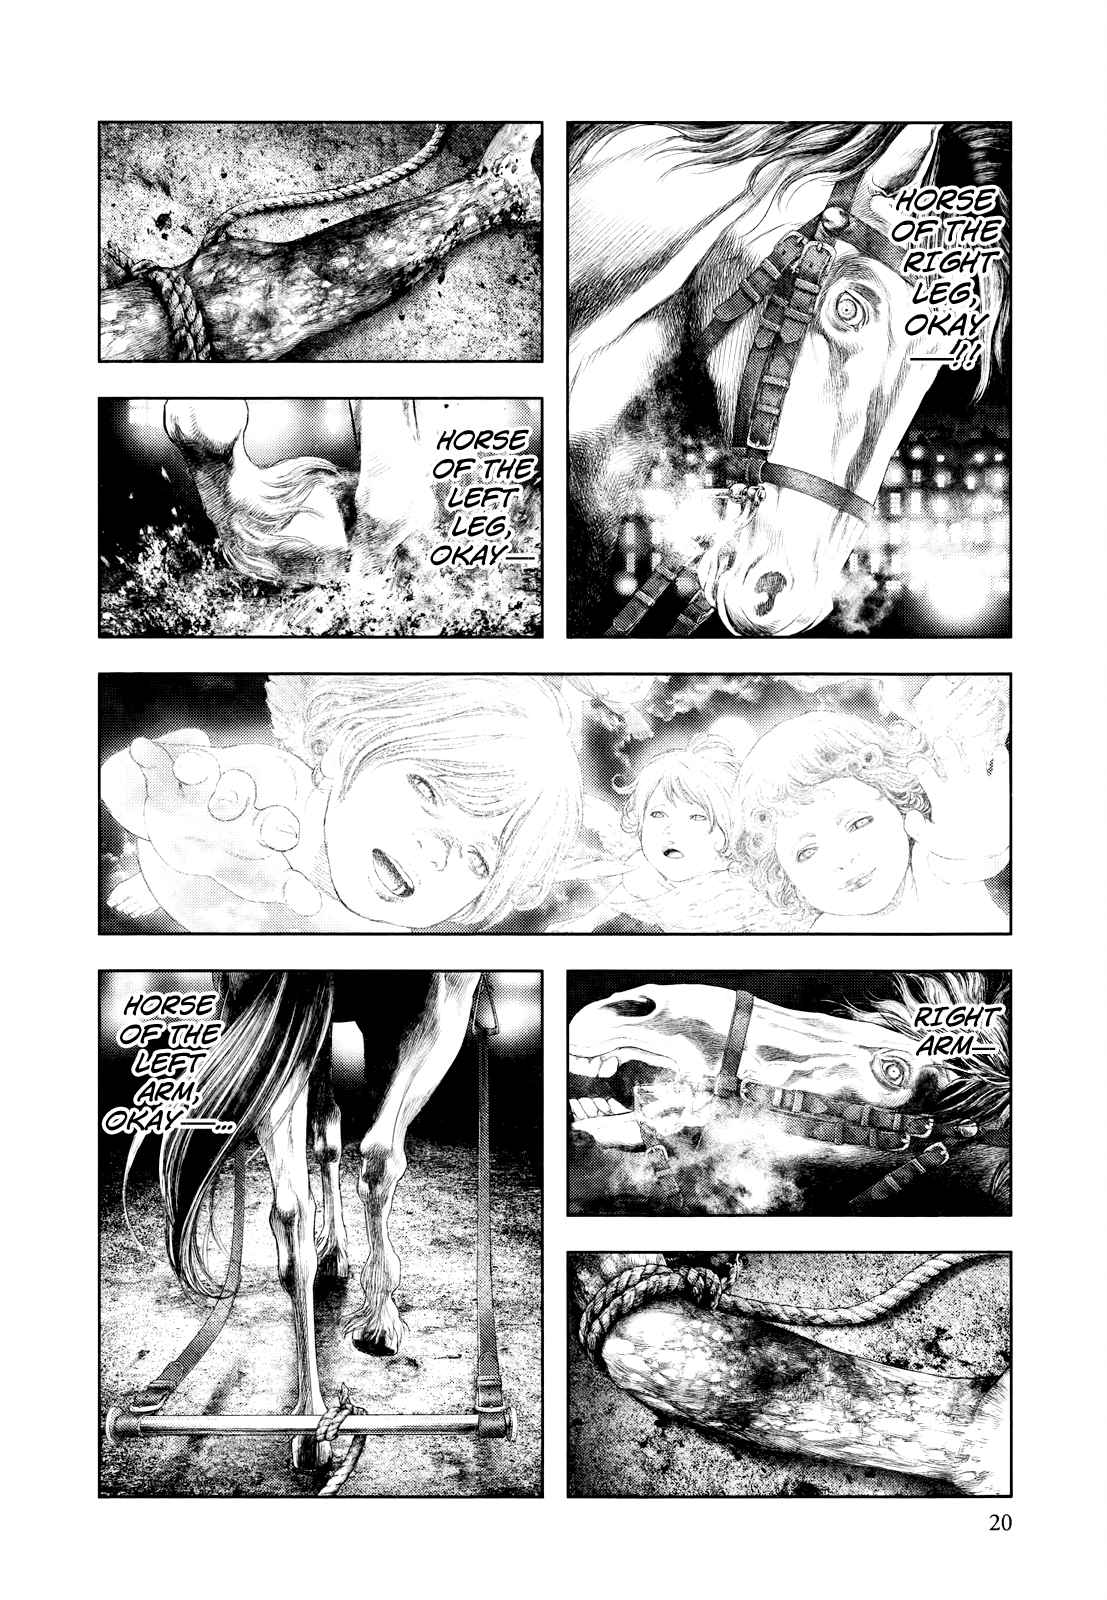 Innocent Vol. 4 Ch. 32 Mode of Death